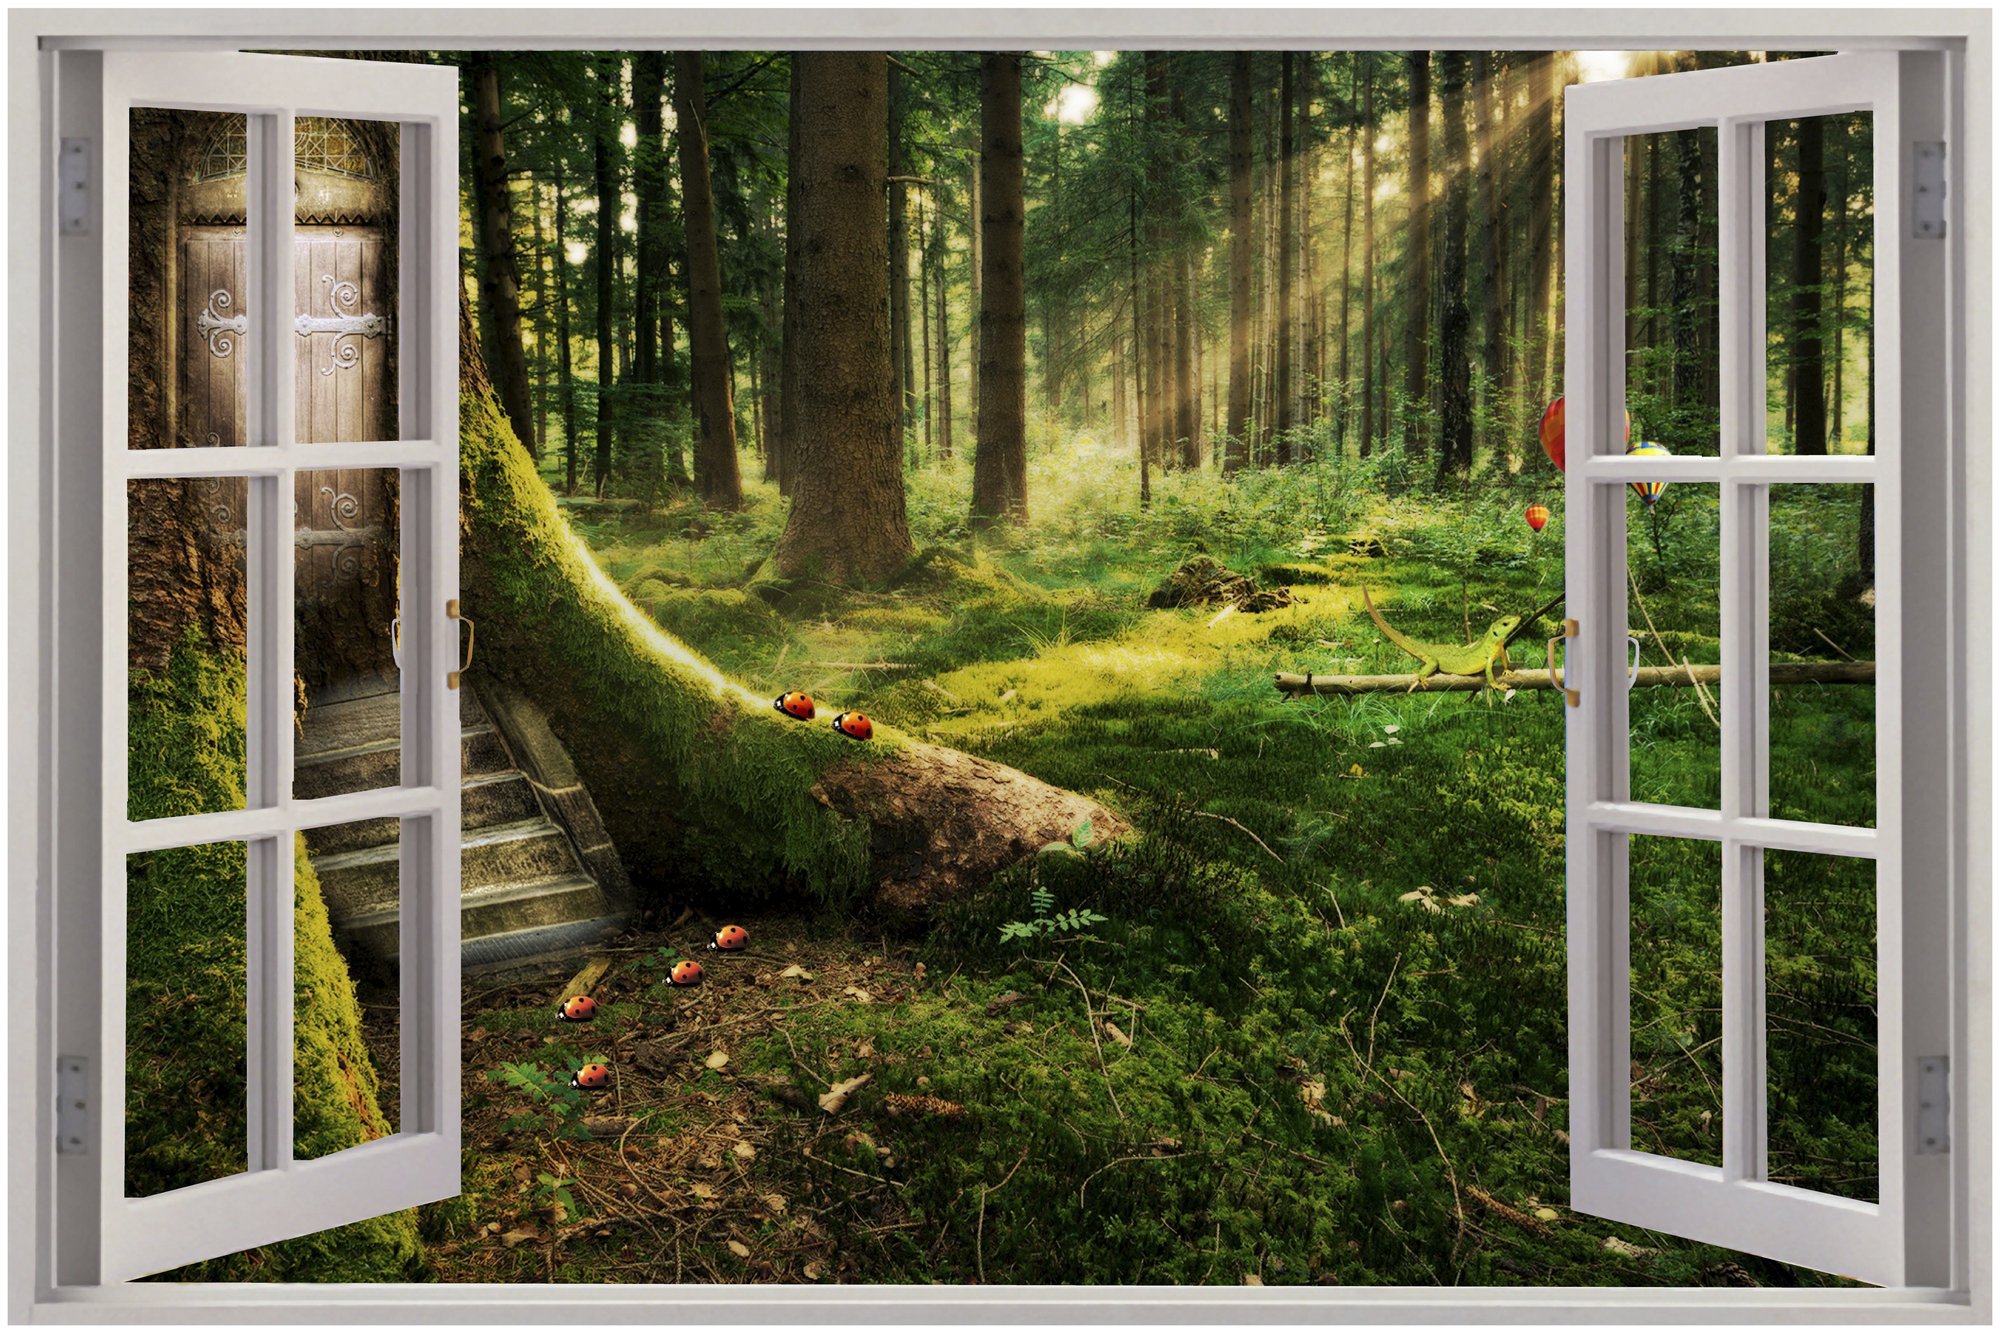 Window Enchanted Forest Wall Stickers Mural Art Decal Wallpaper